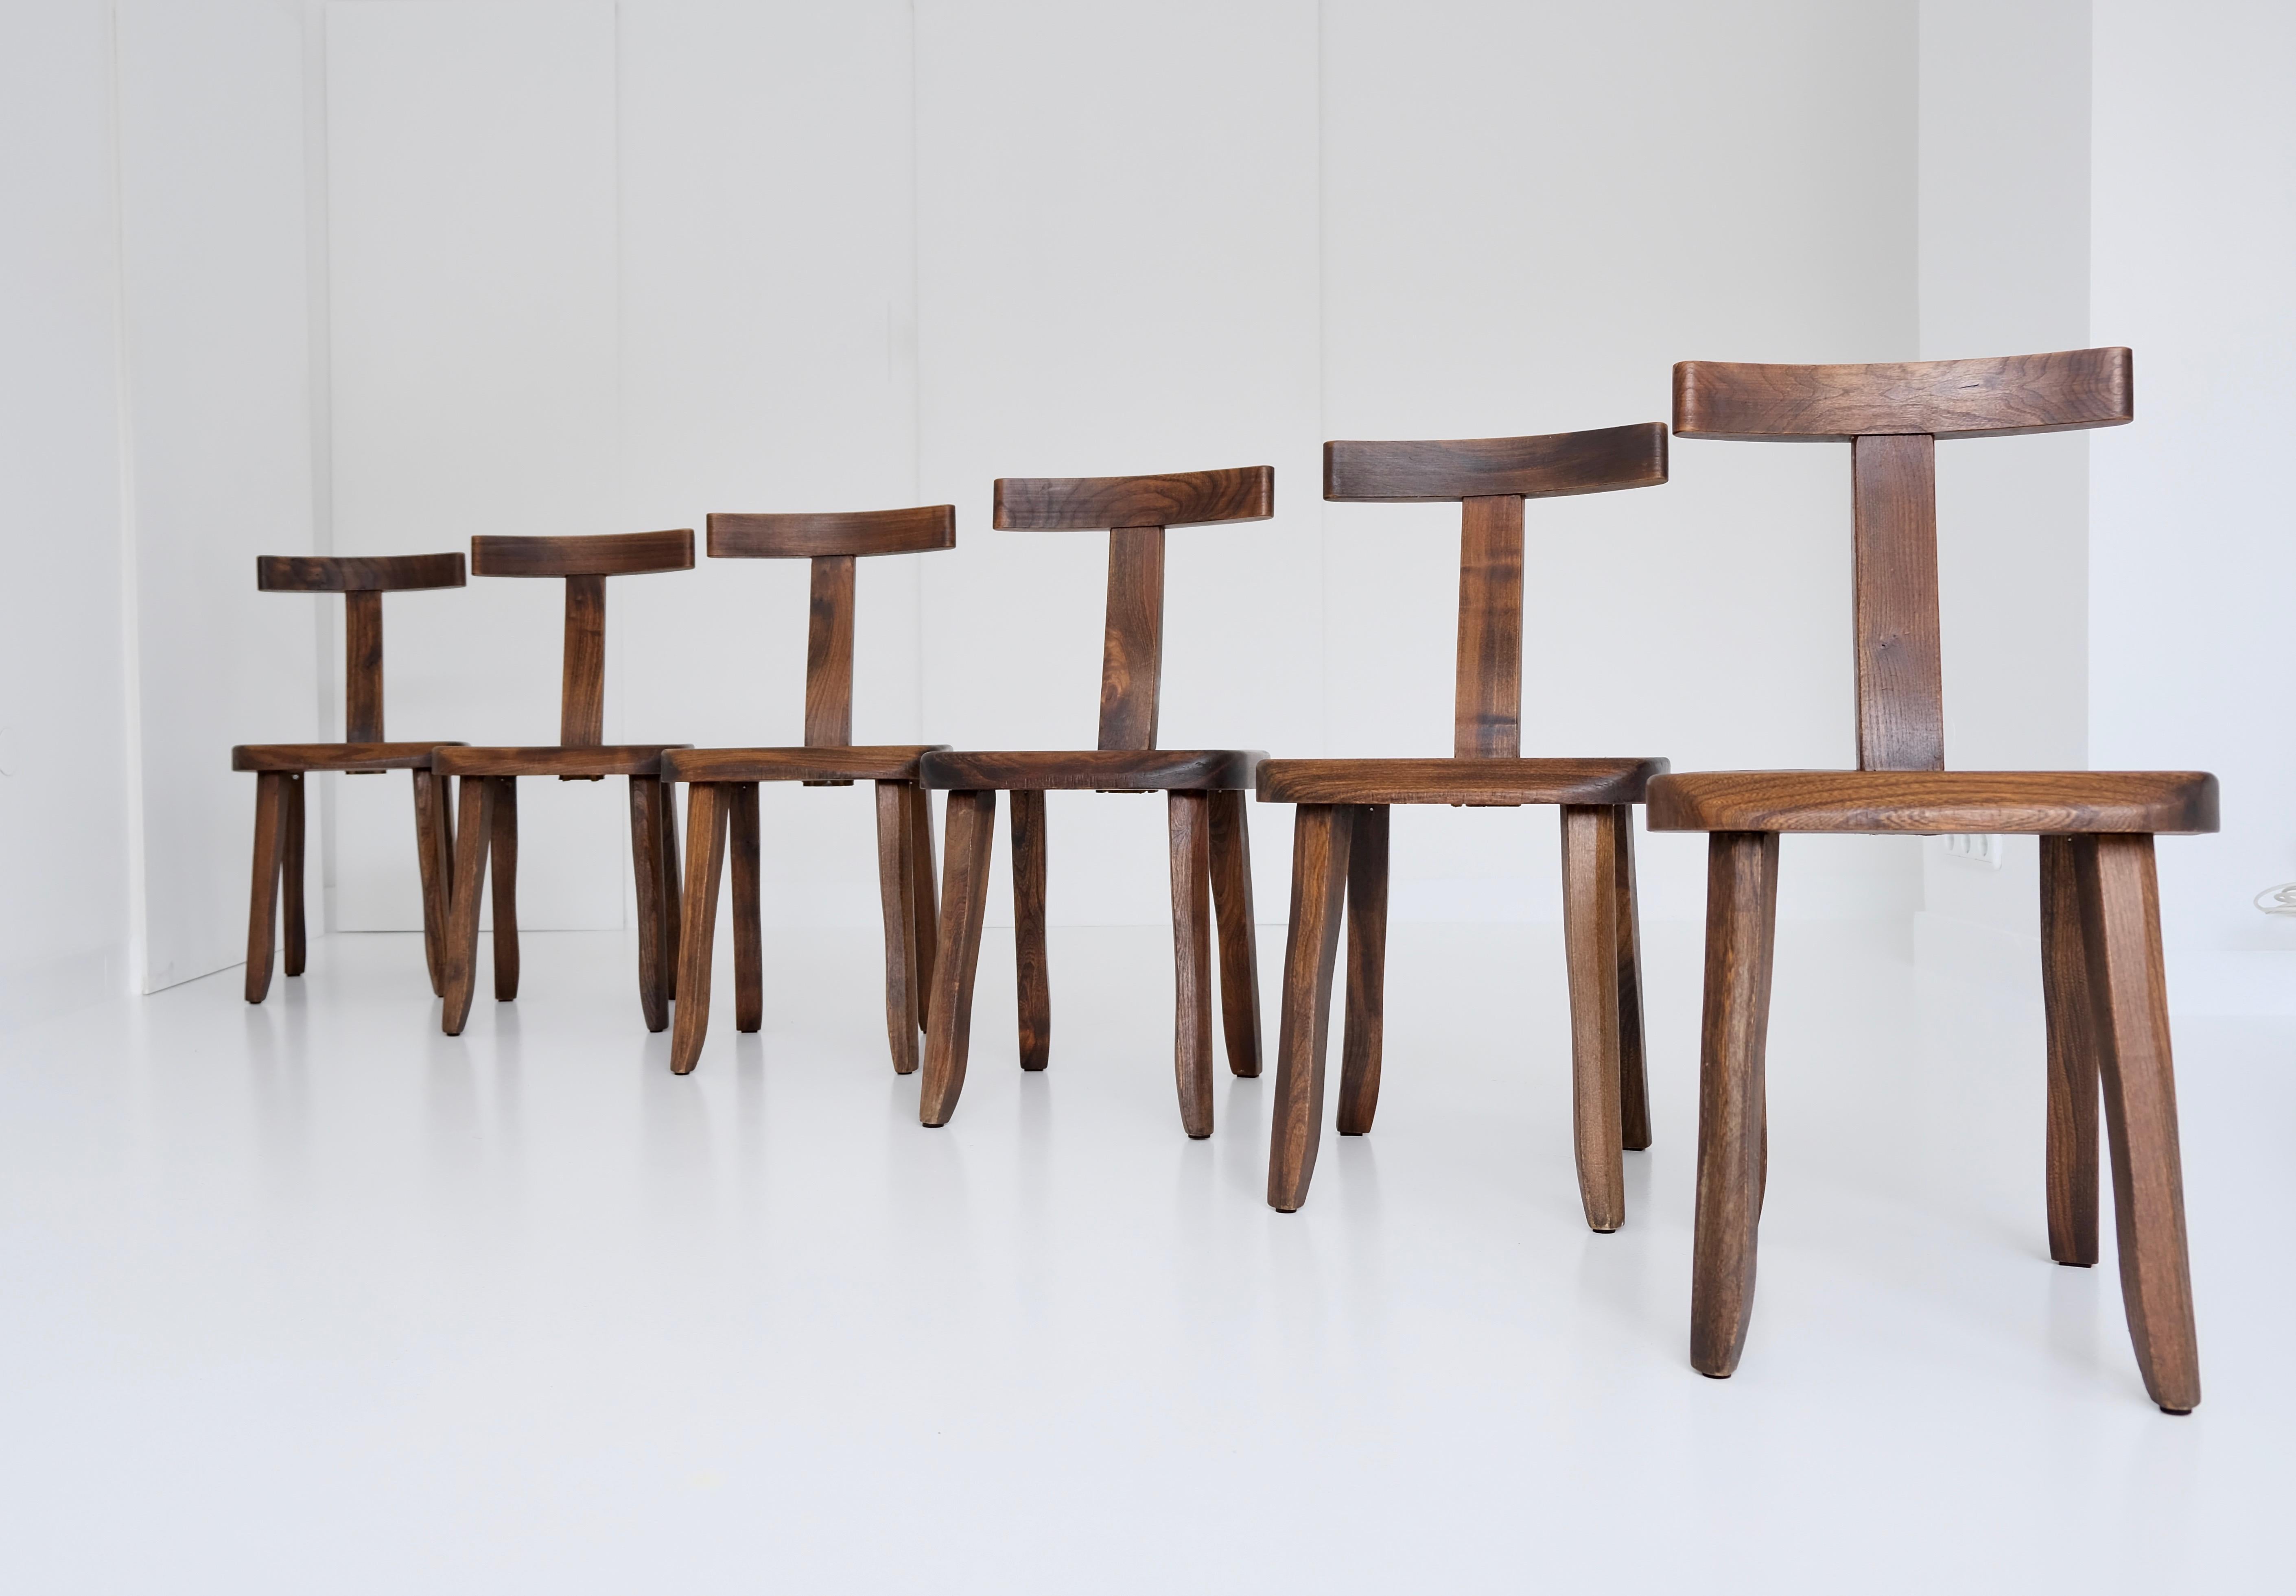 European Set of 6 Brutalistic, Minimalistic Dining or Side Chairs Made of Elm Wood